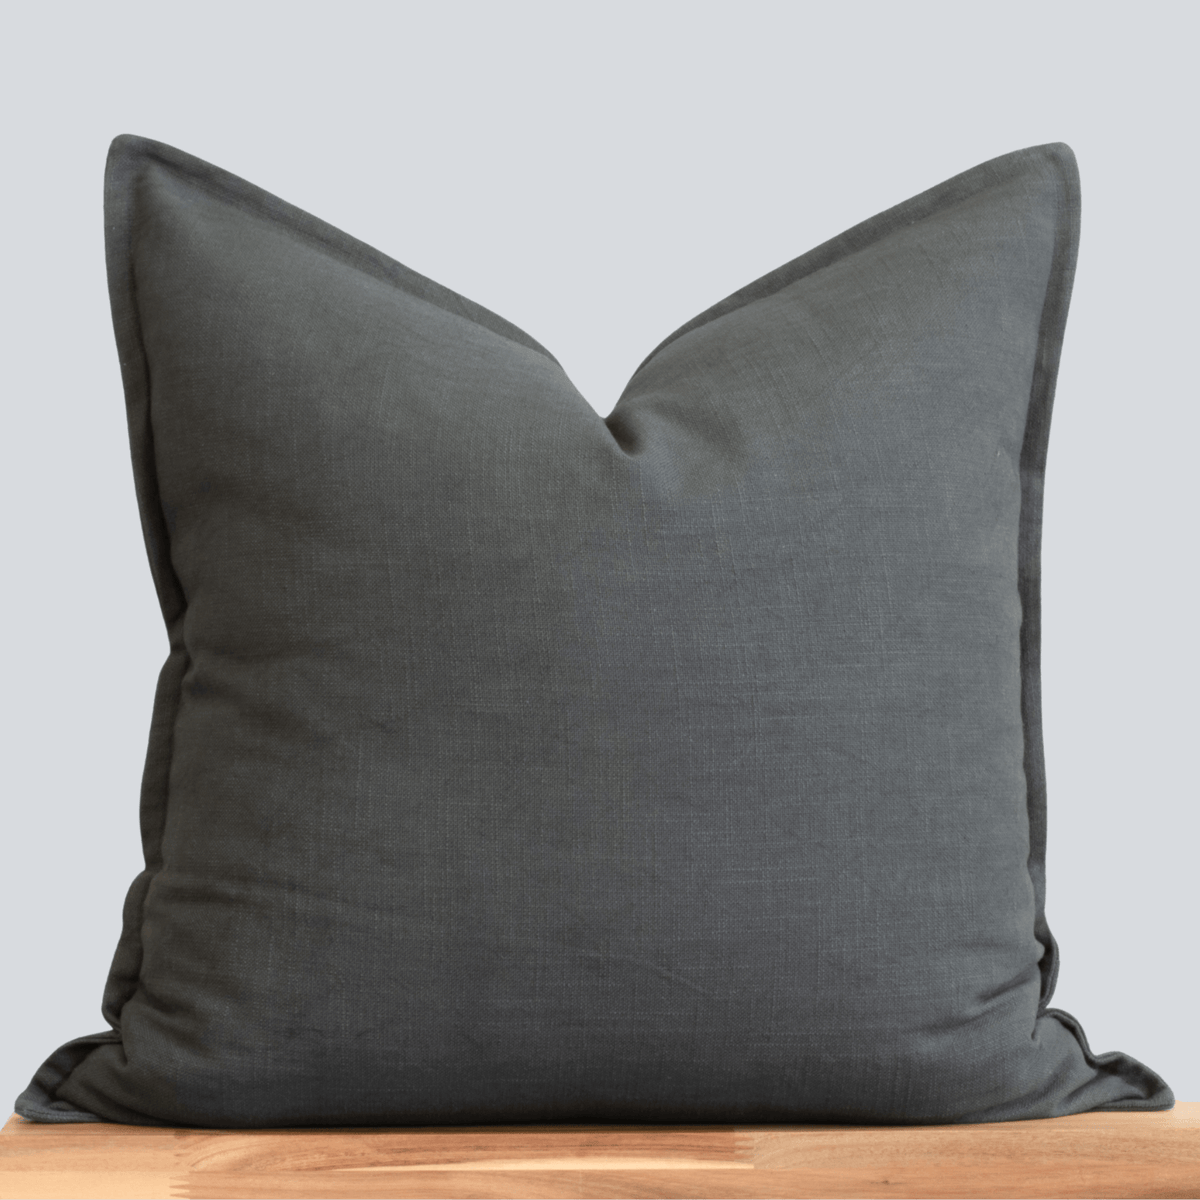 Carissa Charcoal Global Charcoal Large Throw Pillow With Insert